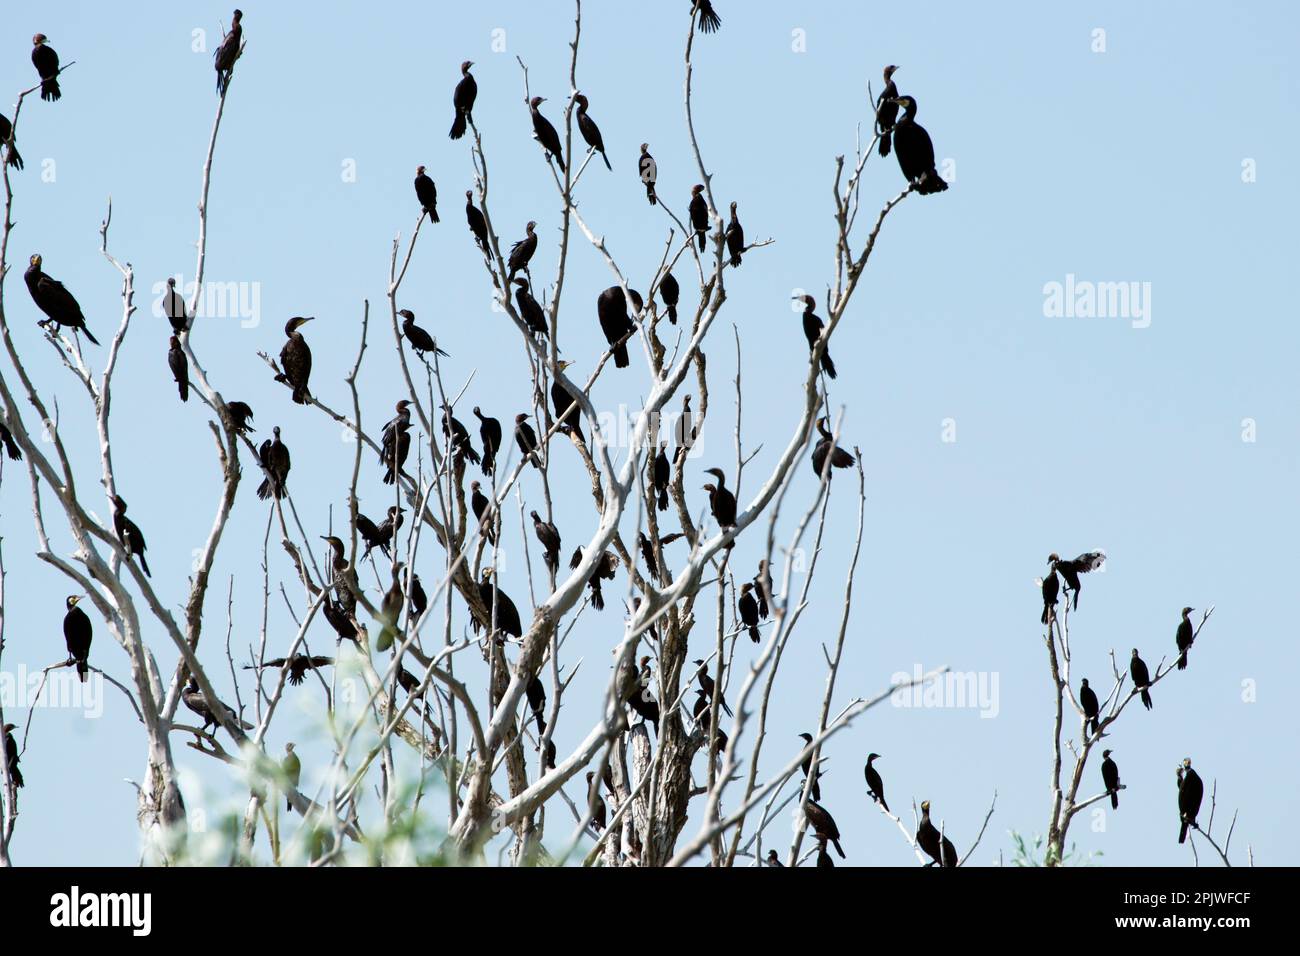 A flock of cormorants, large diving birds with long neck, hooked bill, short legs sitting on the branches of a dry tree in the Danube Delta. Stock Photo